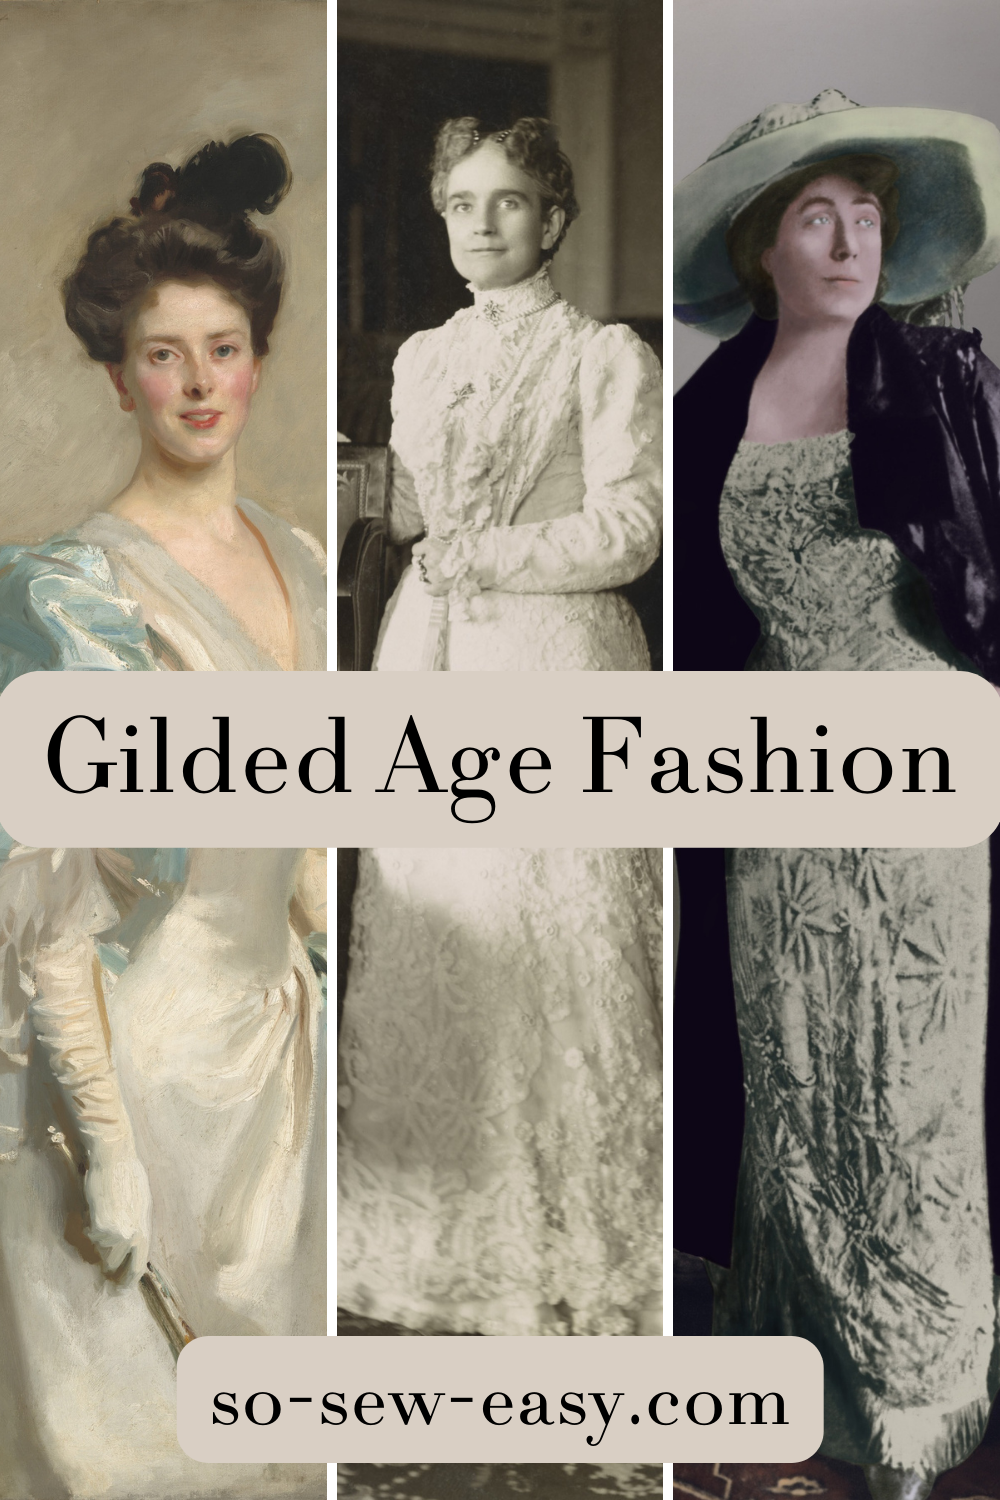 The 10 most romantic dresses for 2022 inspired by The Gilded Age